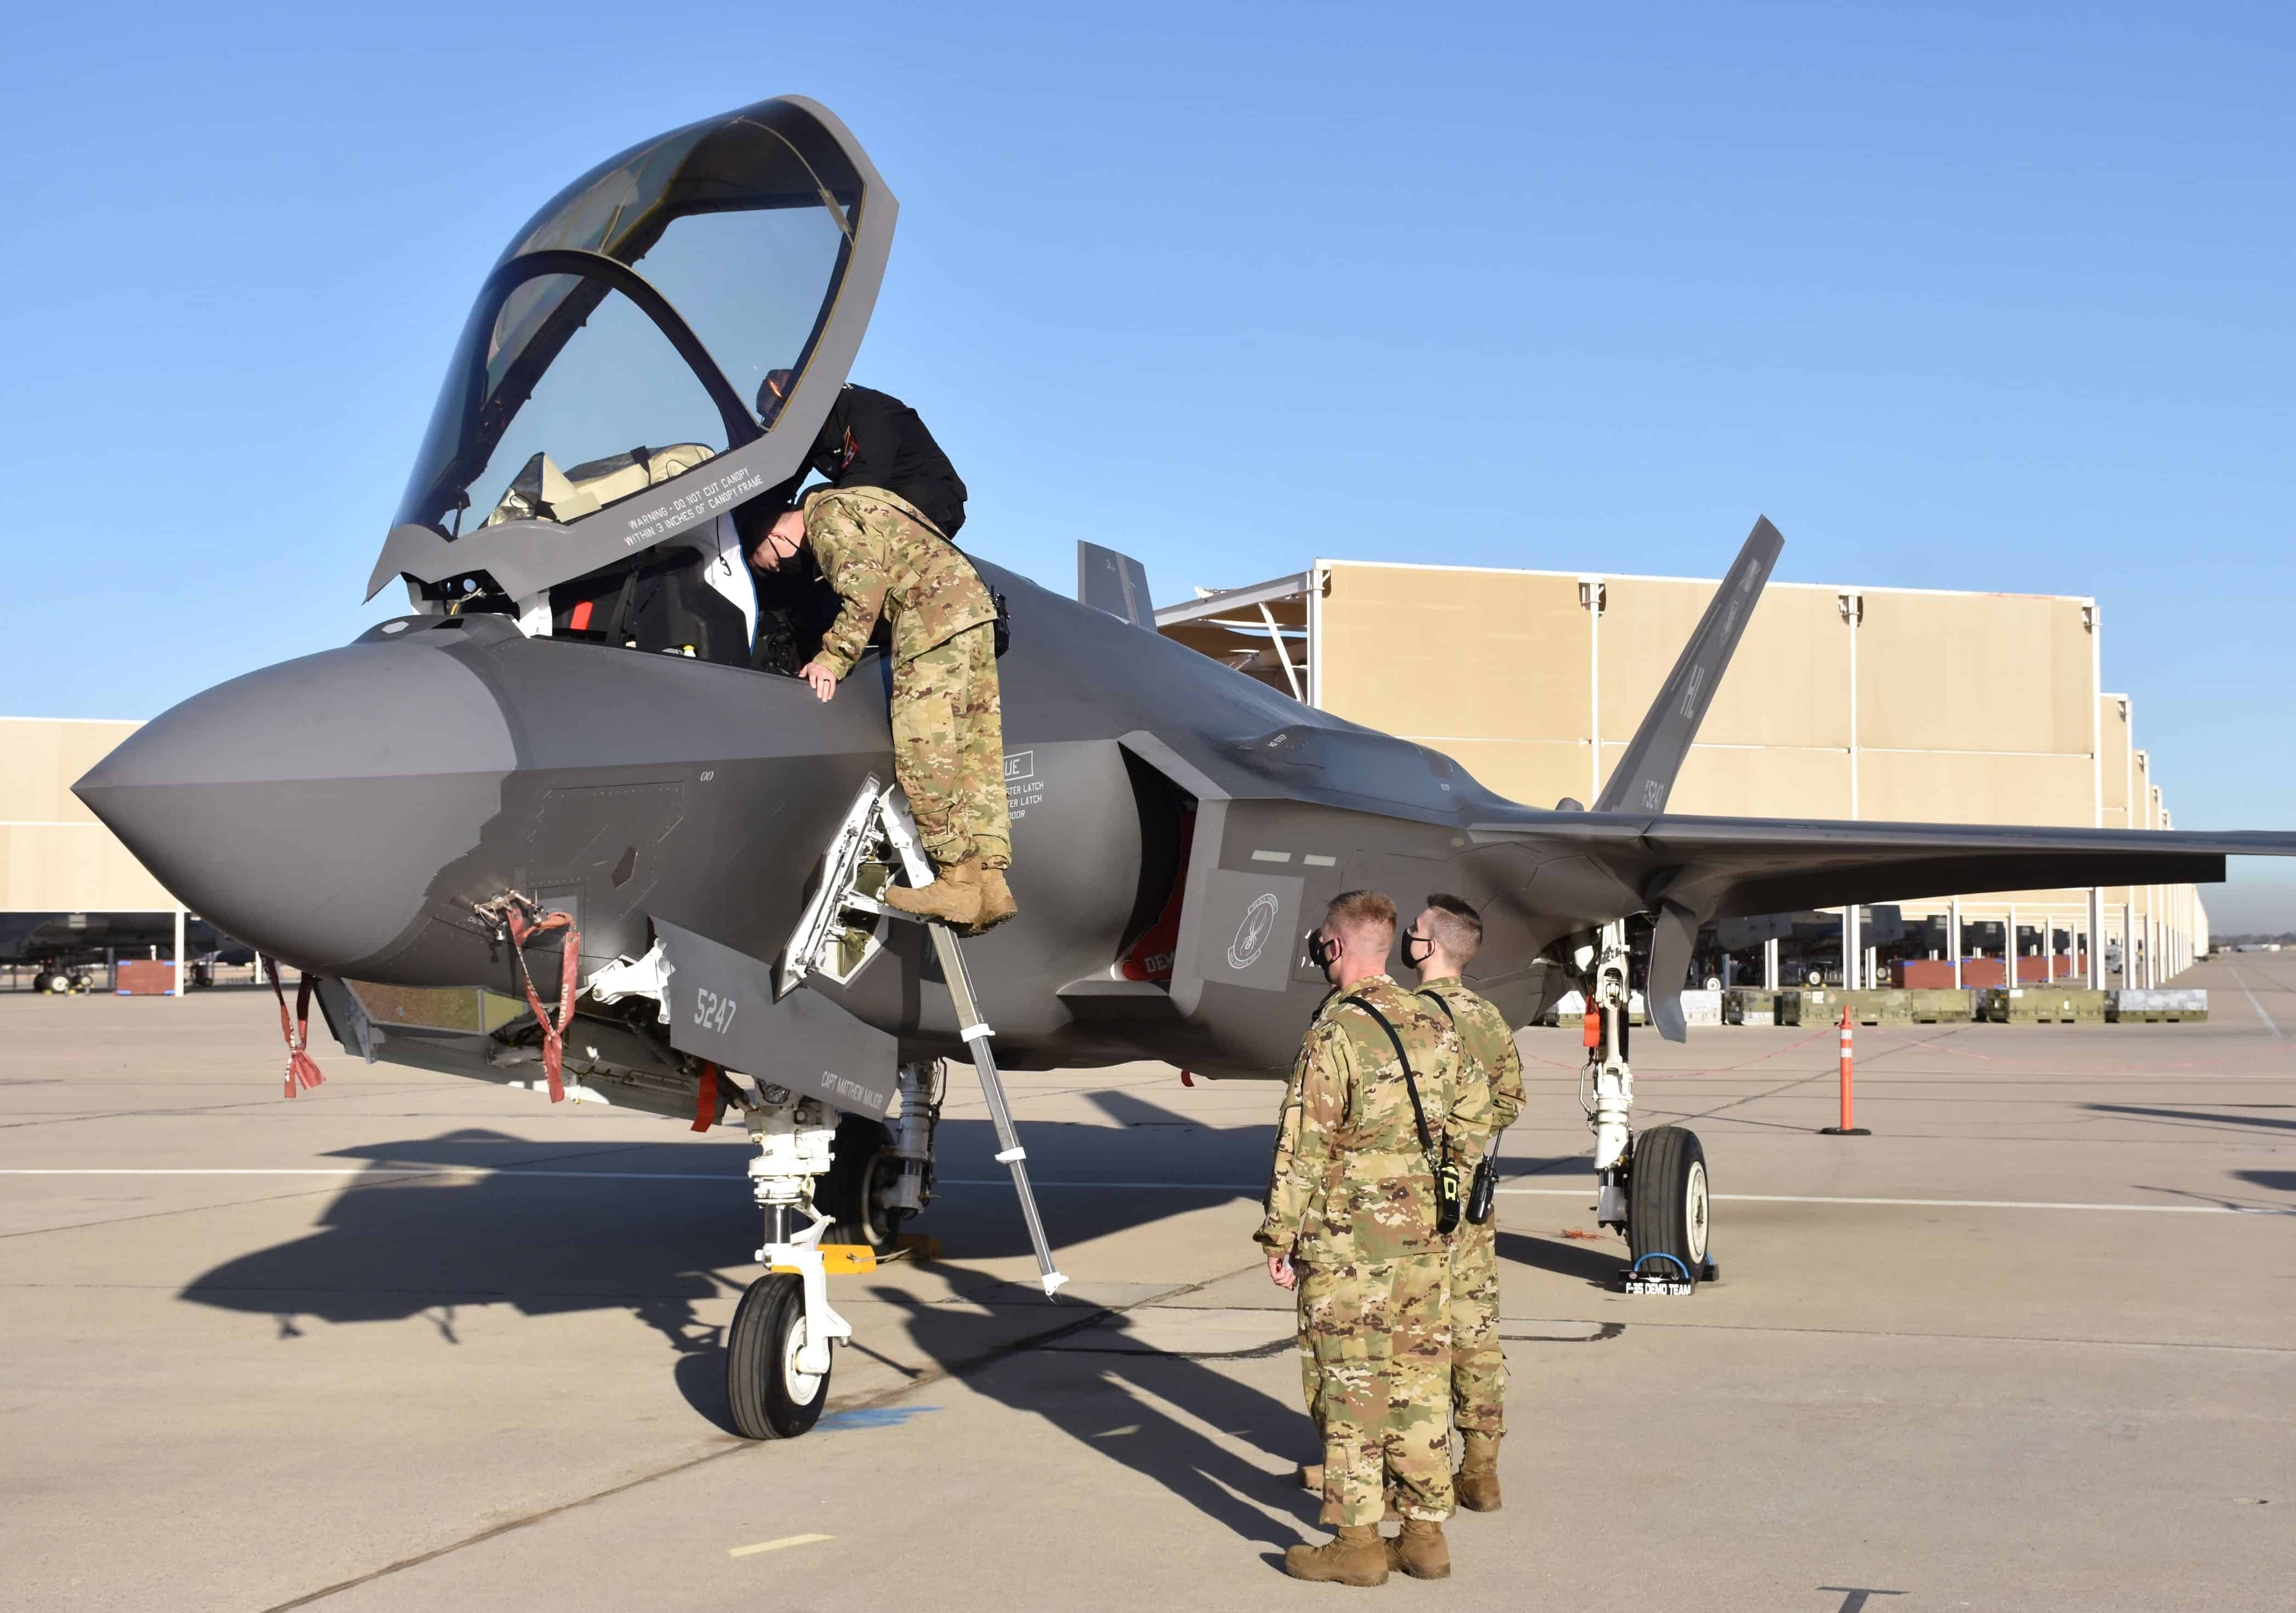 Tucson, USA - March 4, 2021: A U.S. Air Force F-35 Joint Strike Fighter (Lightning II) jet at Davis Monthan Air Force Base. This F-35 is assigned to Hill Air Force Base.